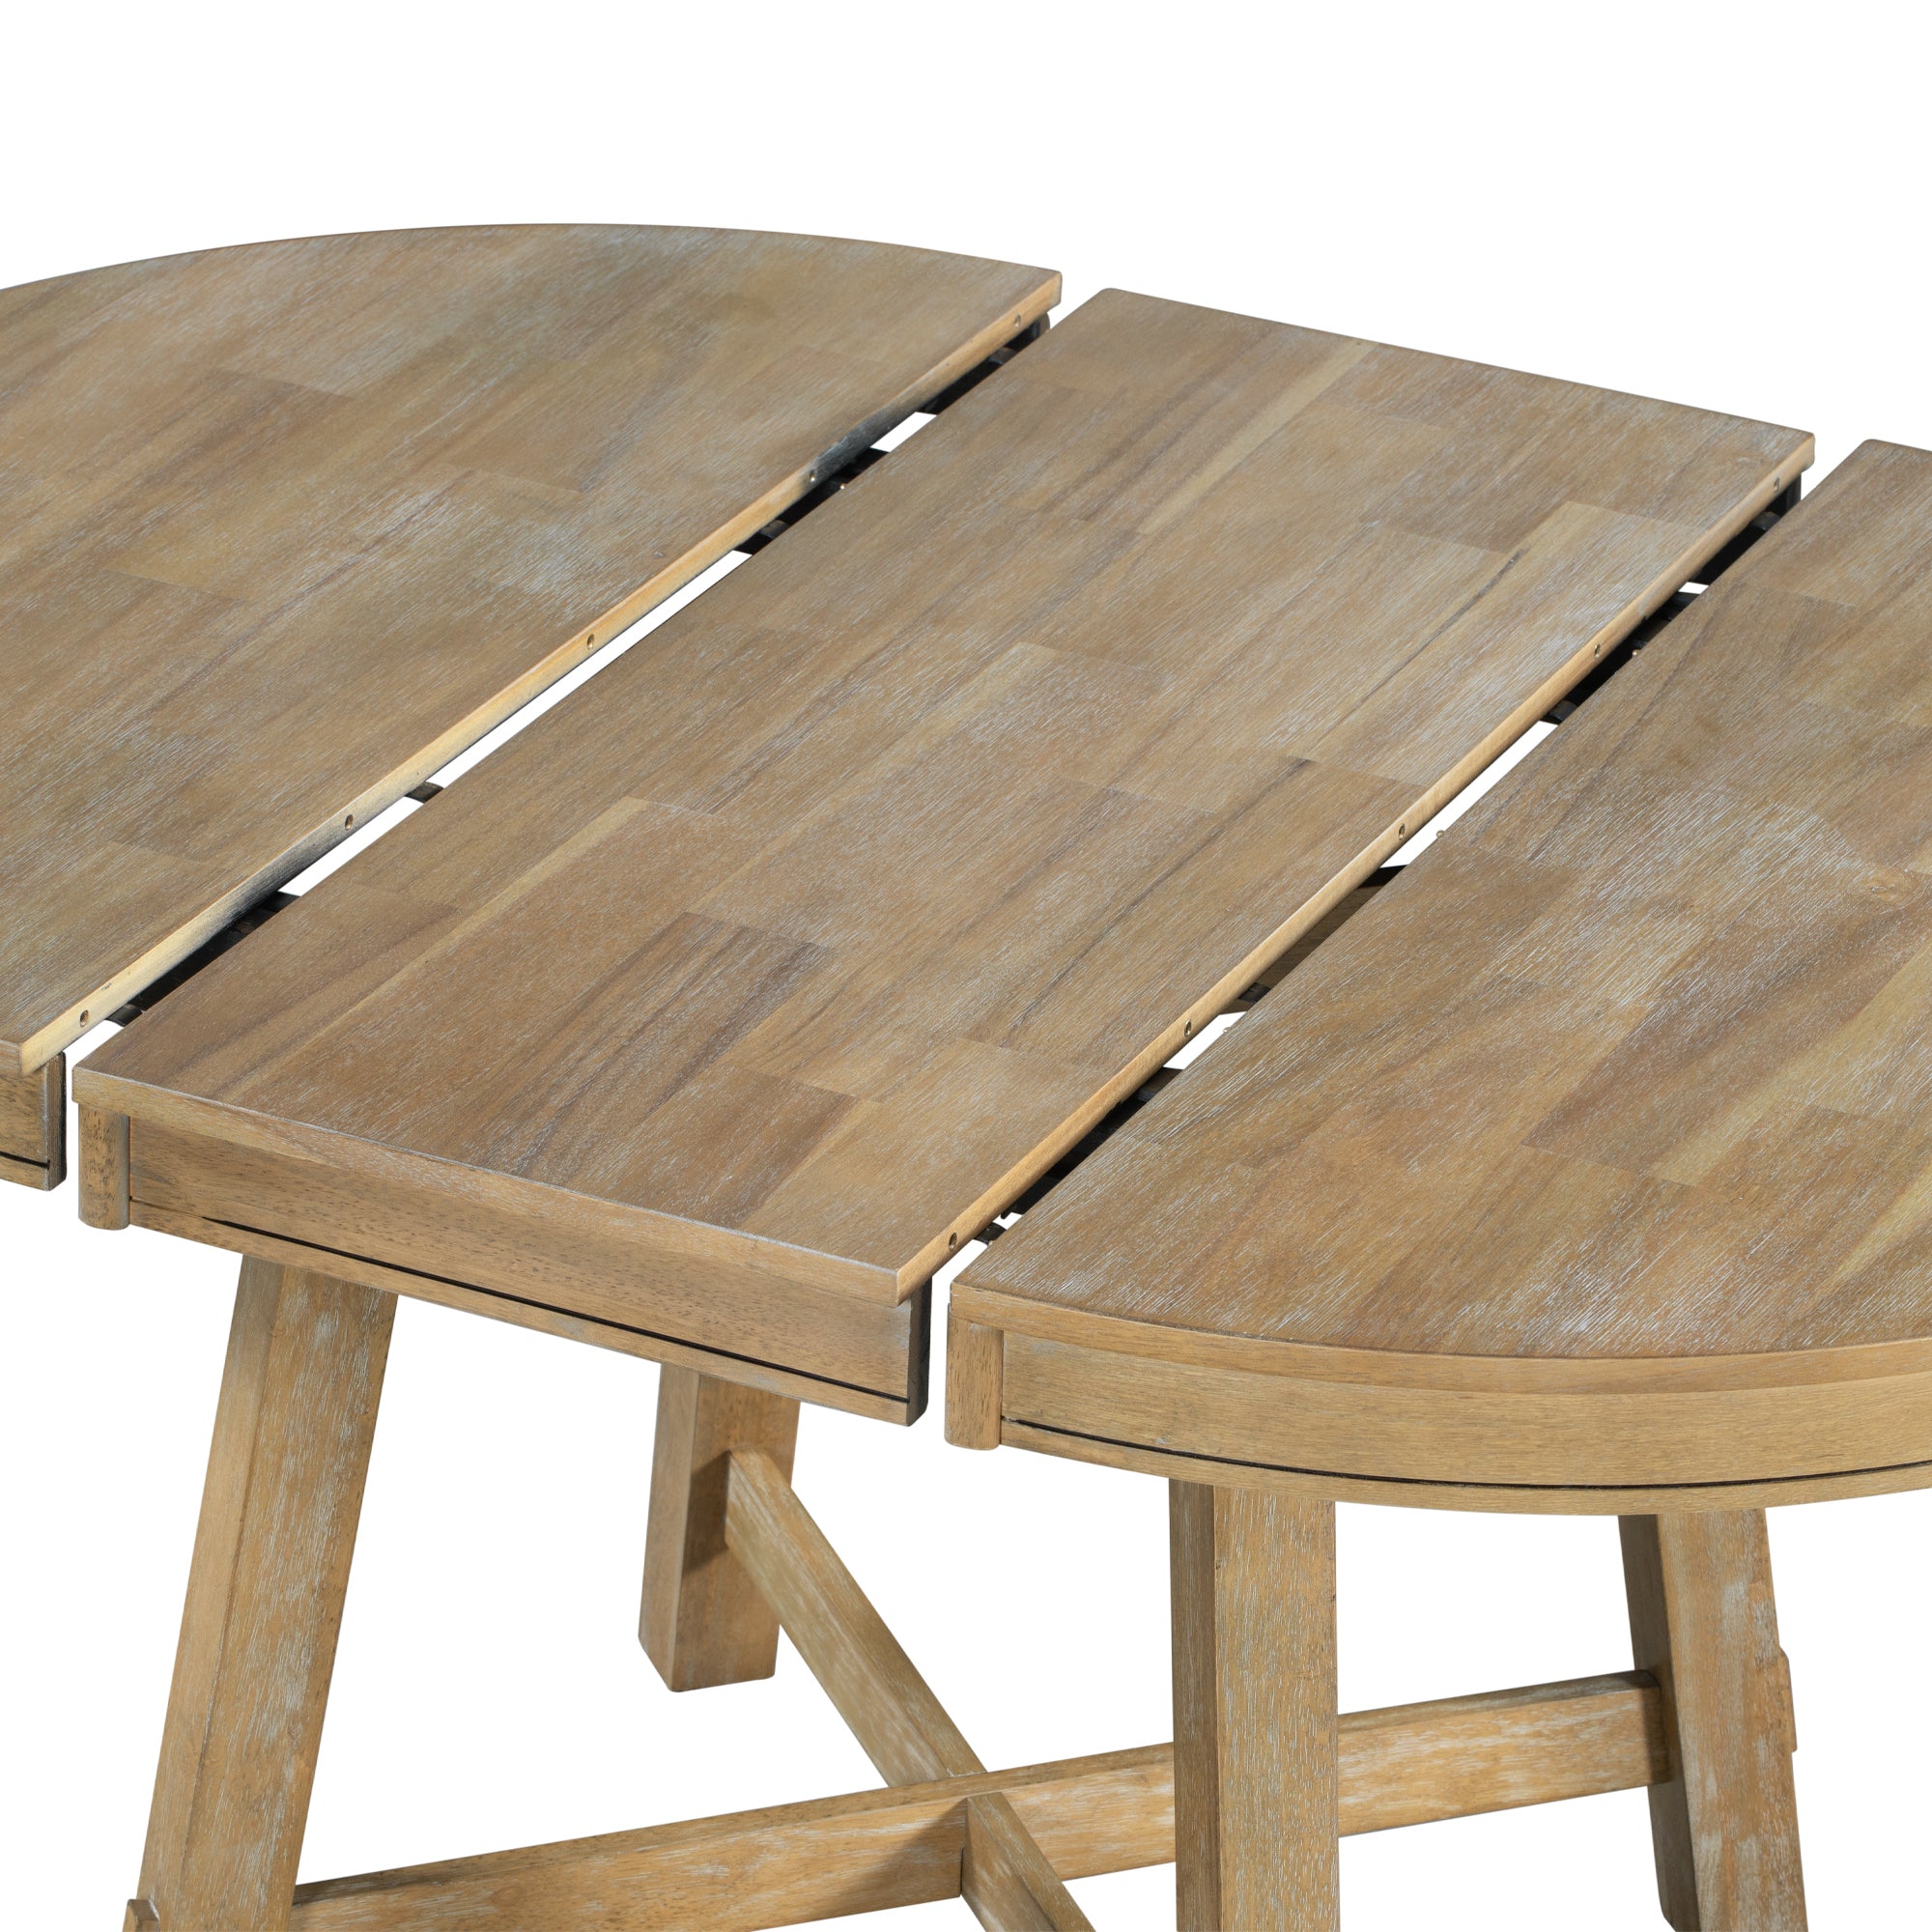 Harrison 5Pc Set Natural Wood Wash Dining Set with Dropleaf. 42" Round Extend to 58" Oval